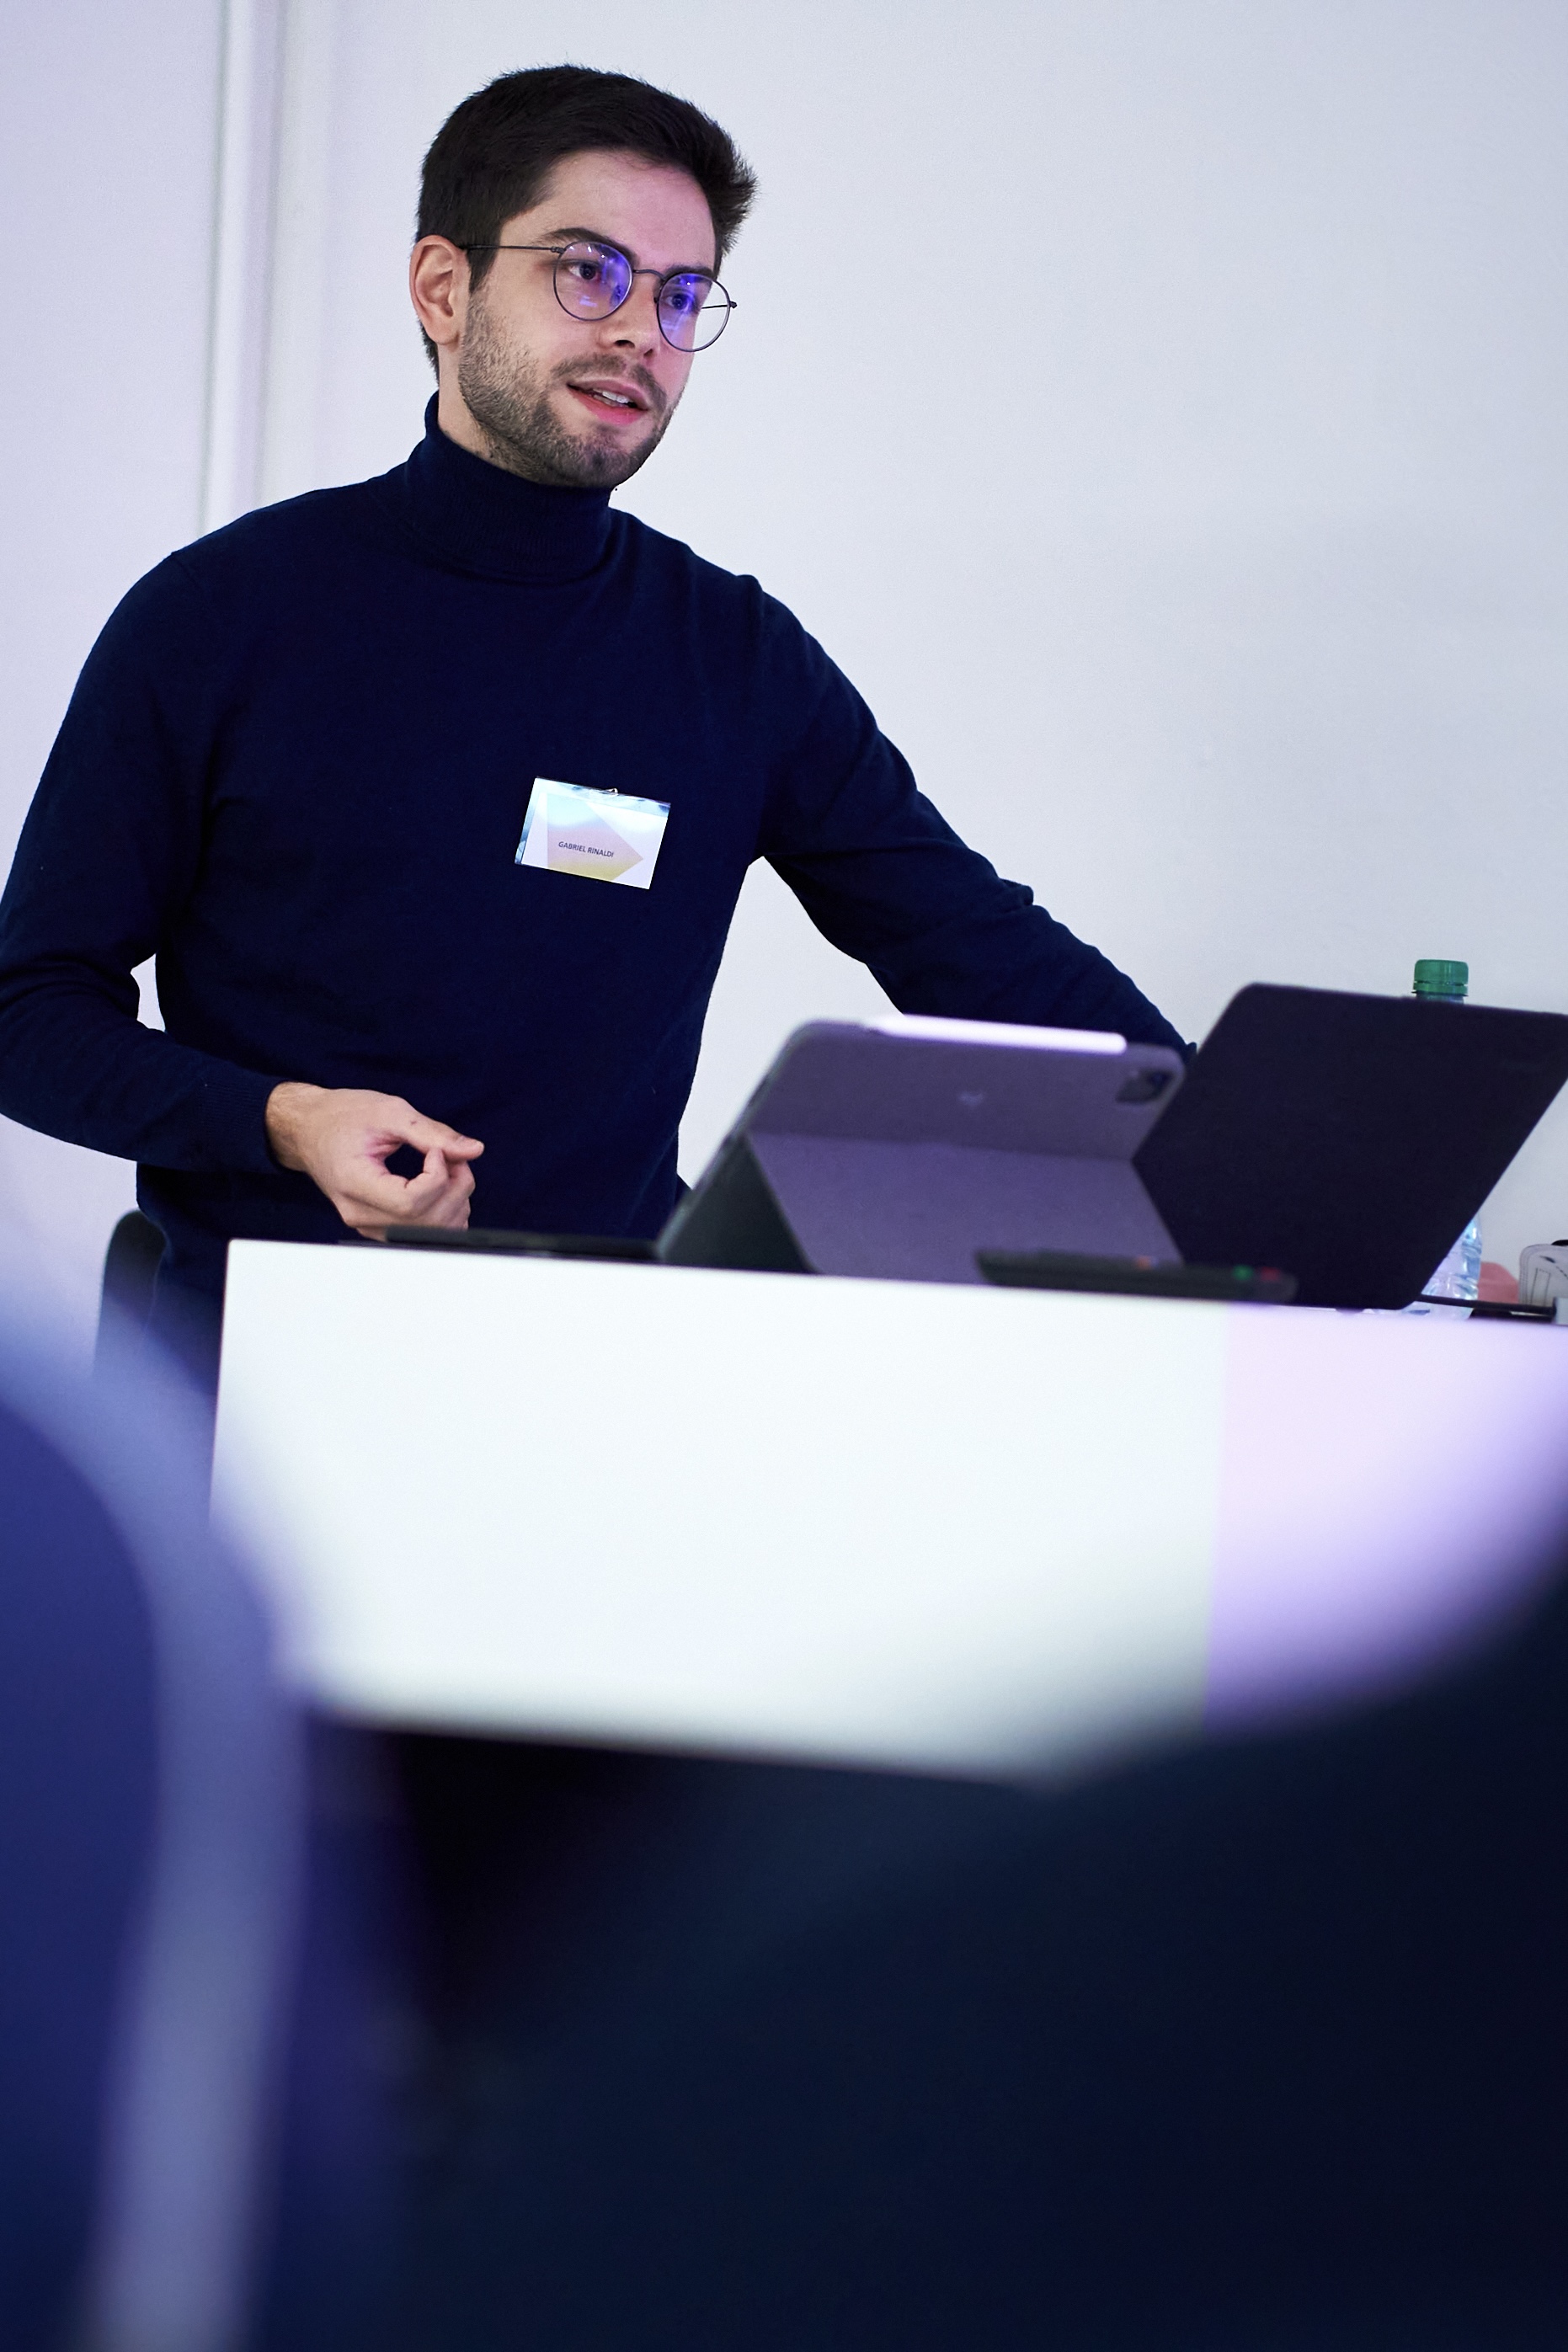 Gabriel Rinaldi gives a workshop on data journalism at the Youth Media Convention 2022 in Hamburg, photographed by Joscha F. Westerkamp